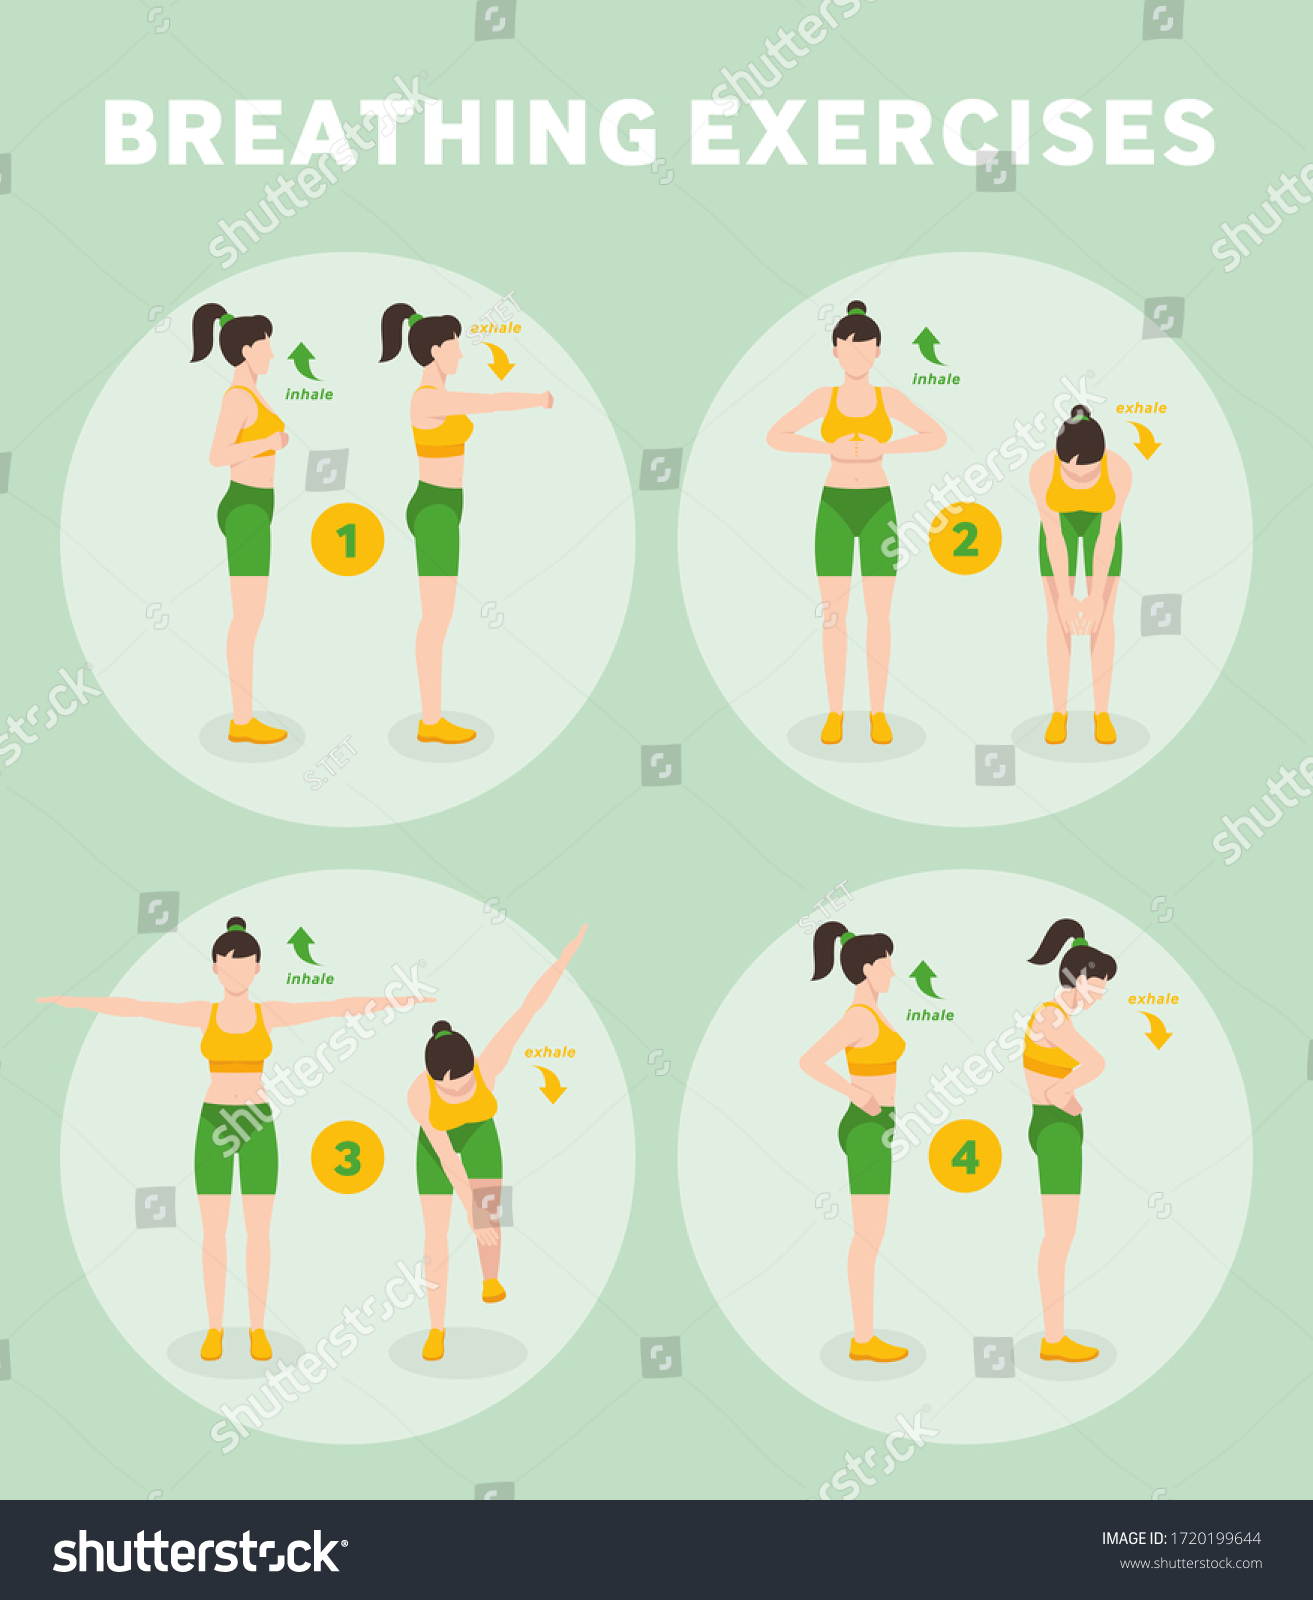 Lung exercise